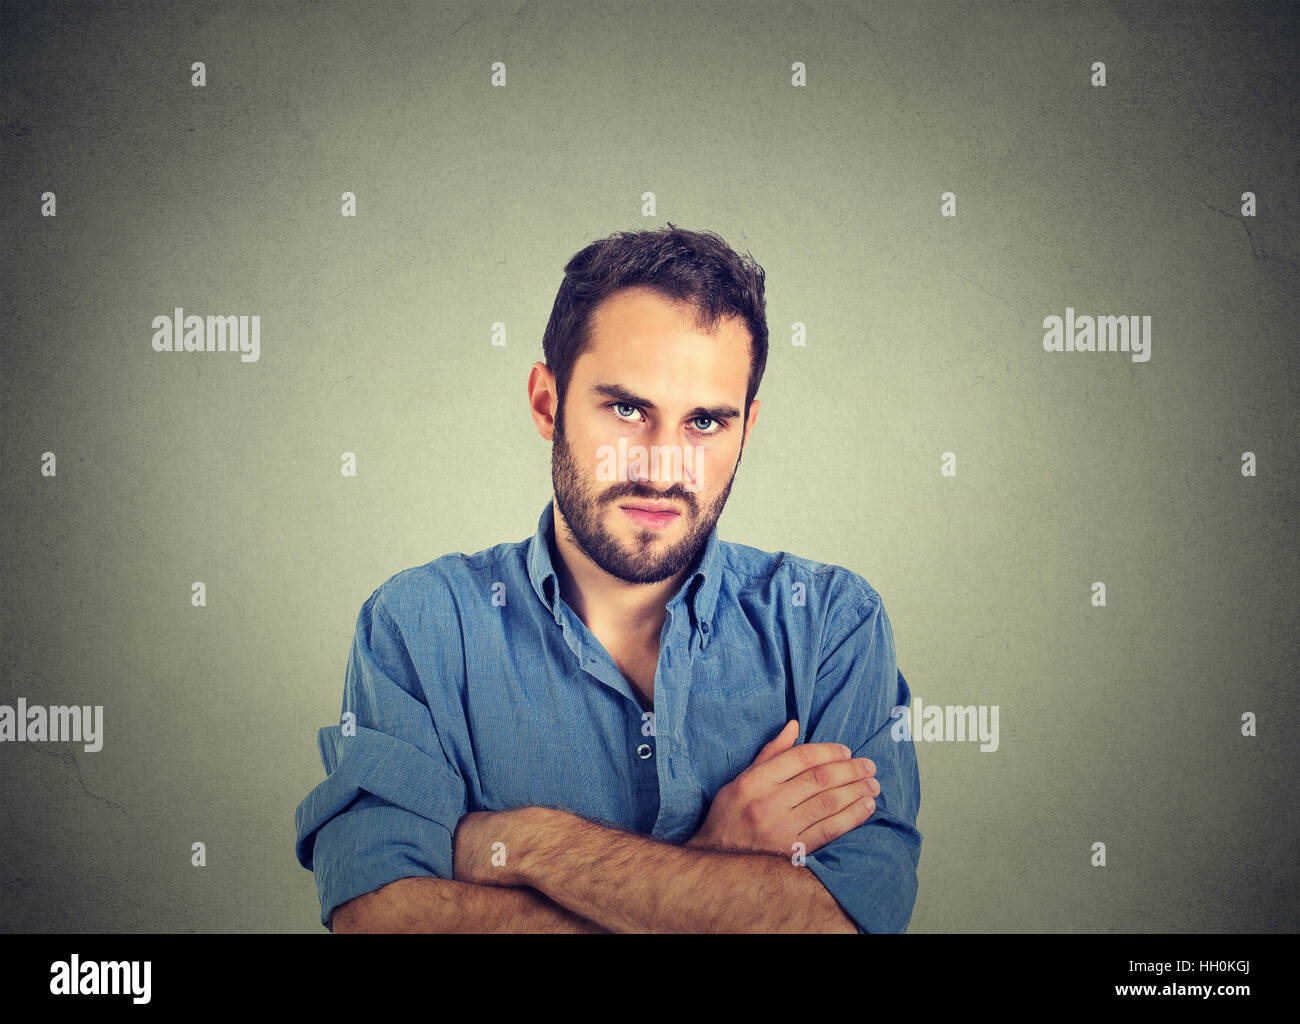 angry young man, about to have nervous breakdown, isolated on gray background. Negative human emotion facial expression feelings Stock Photo